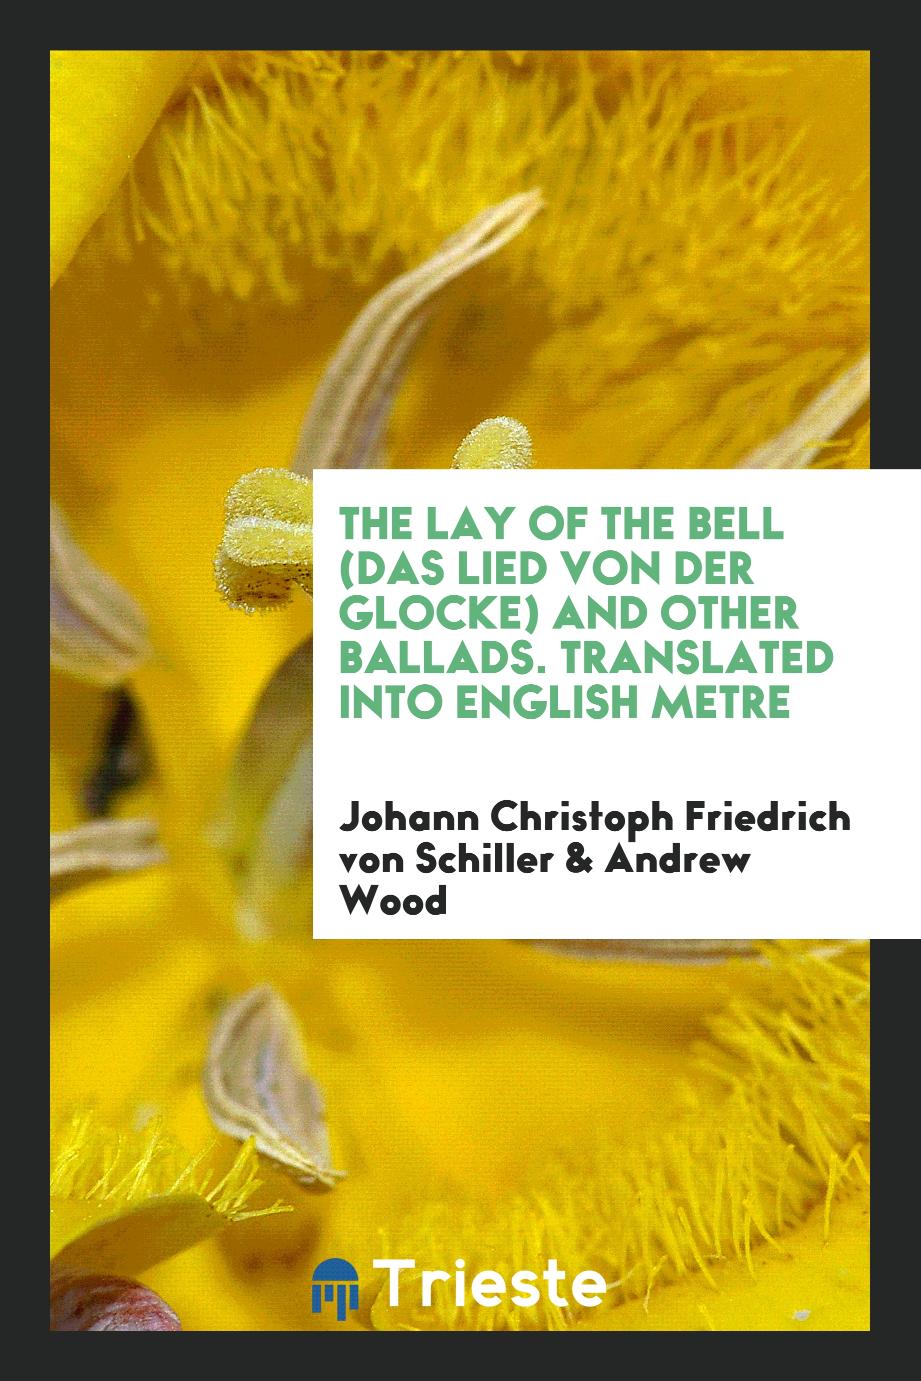 The Lay of the Bell (Das Lied von der Glocke) and Other Ballads. Translated into English Metre